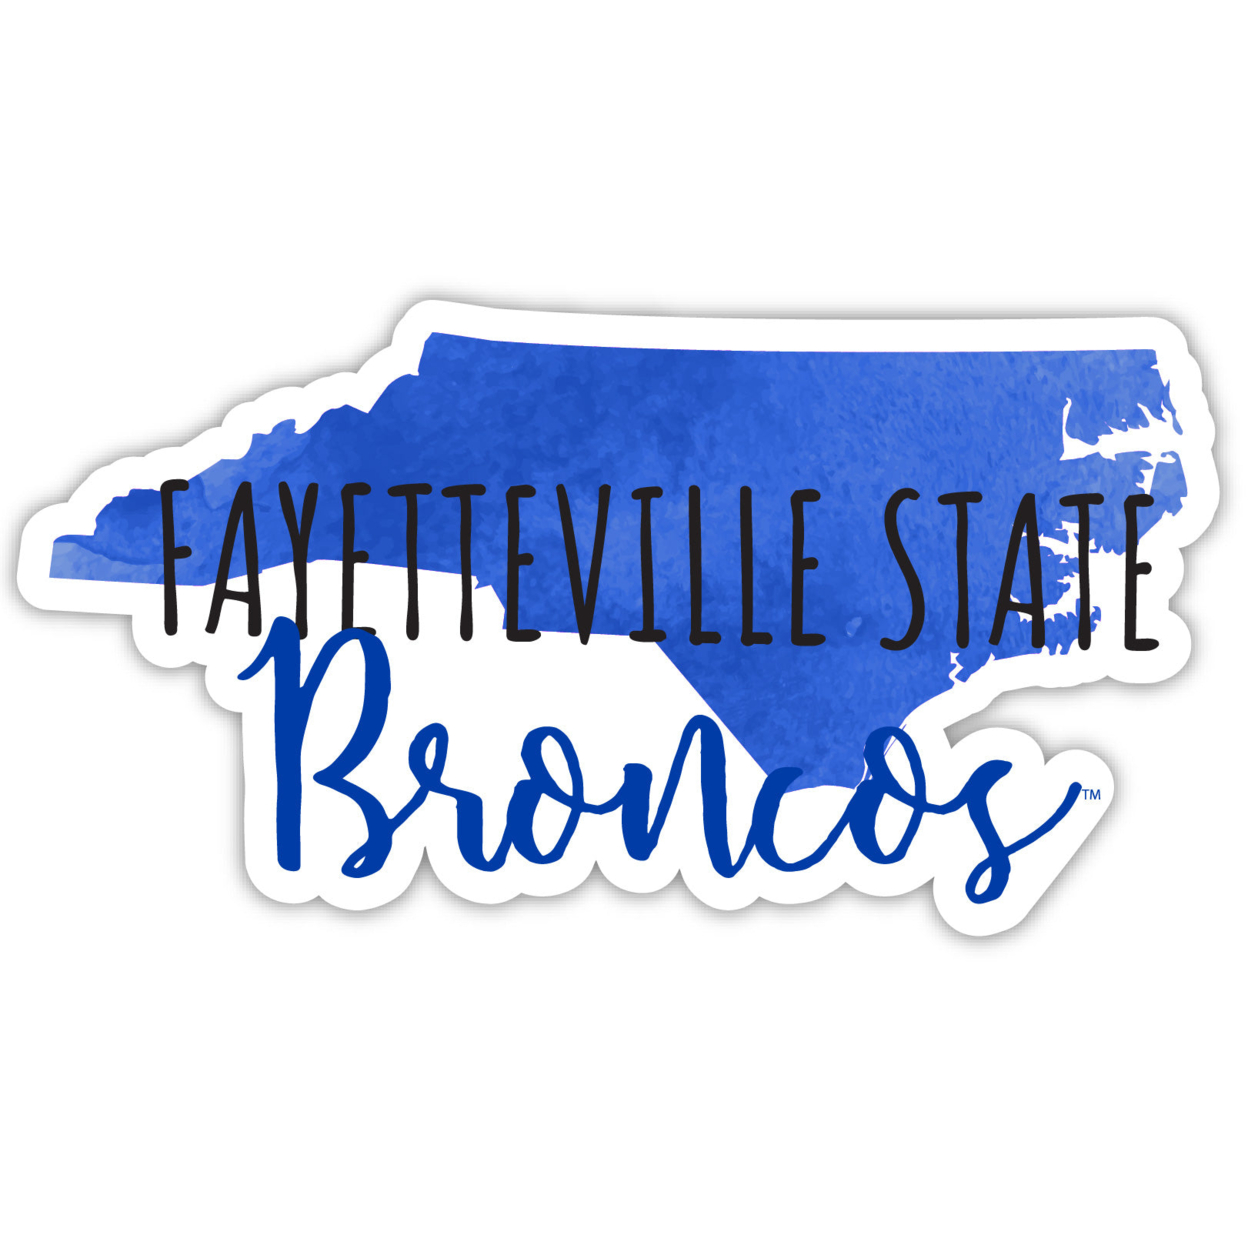 Fayetteville State University Watercolor State Die Cut Decal 2-Inch